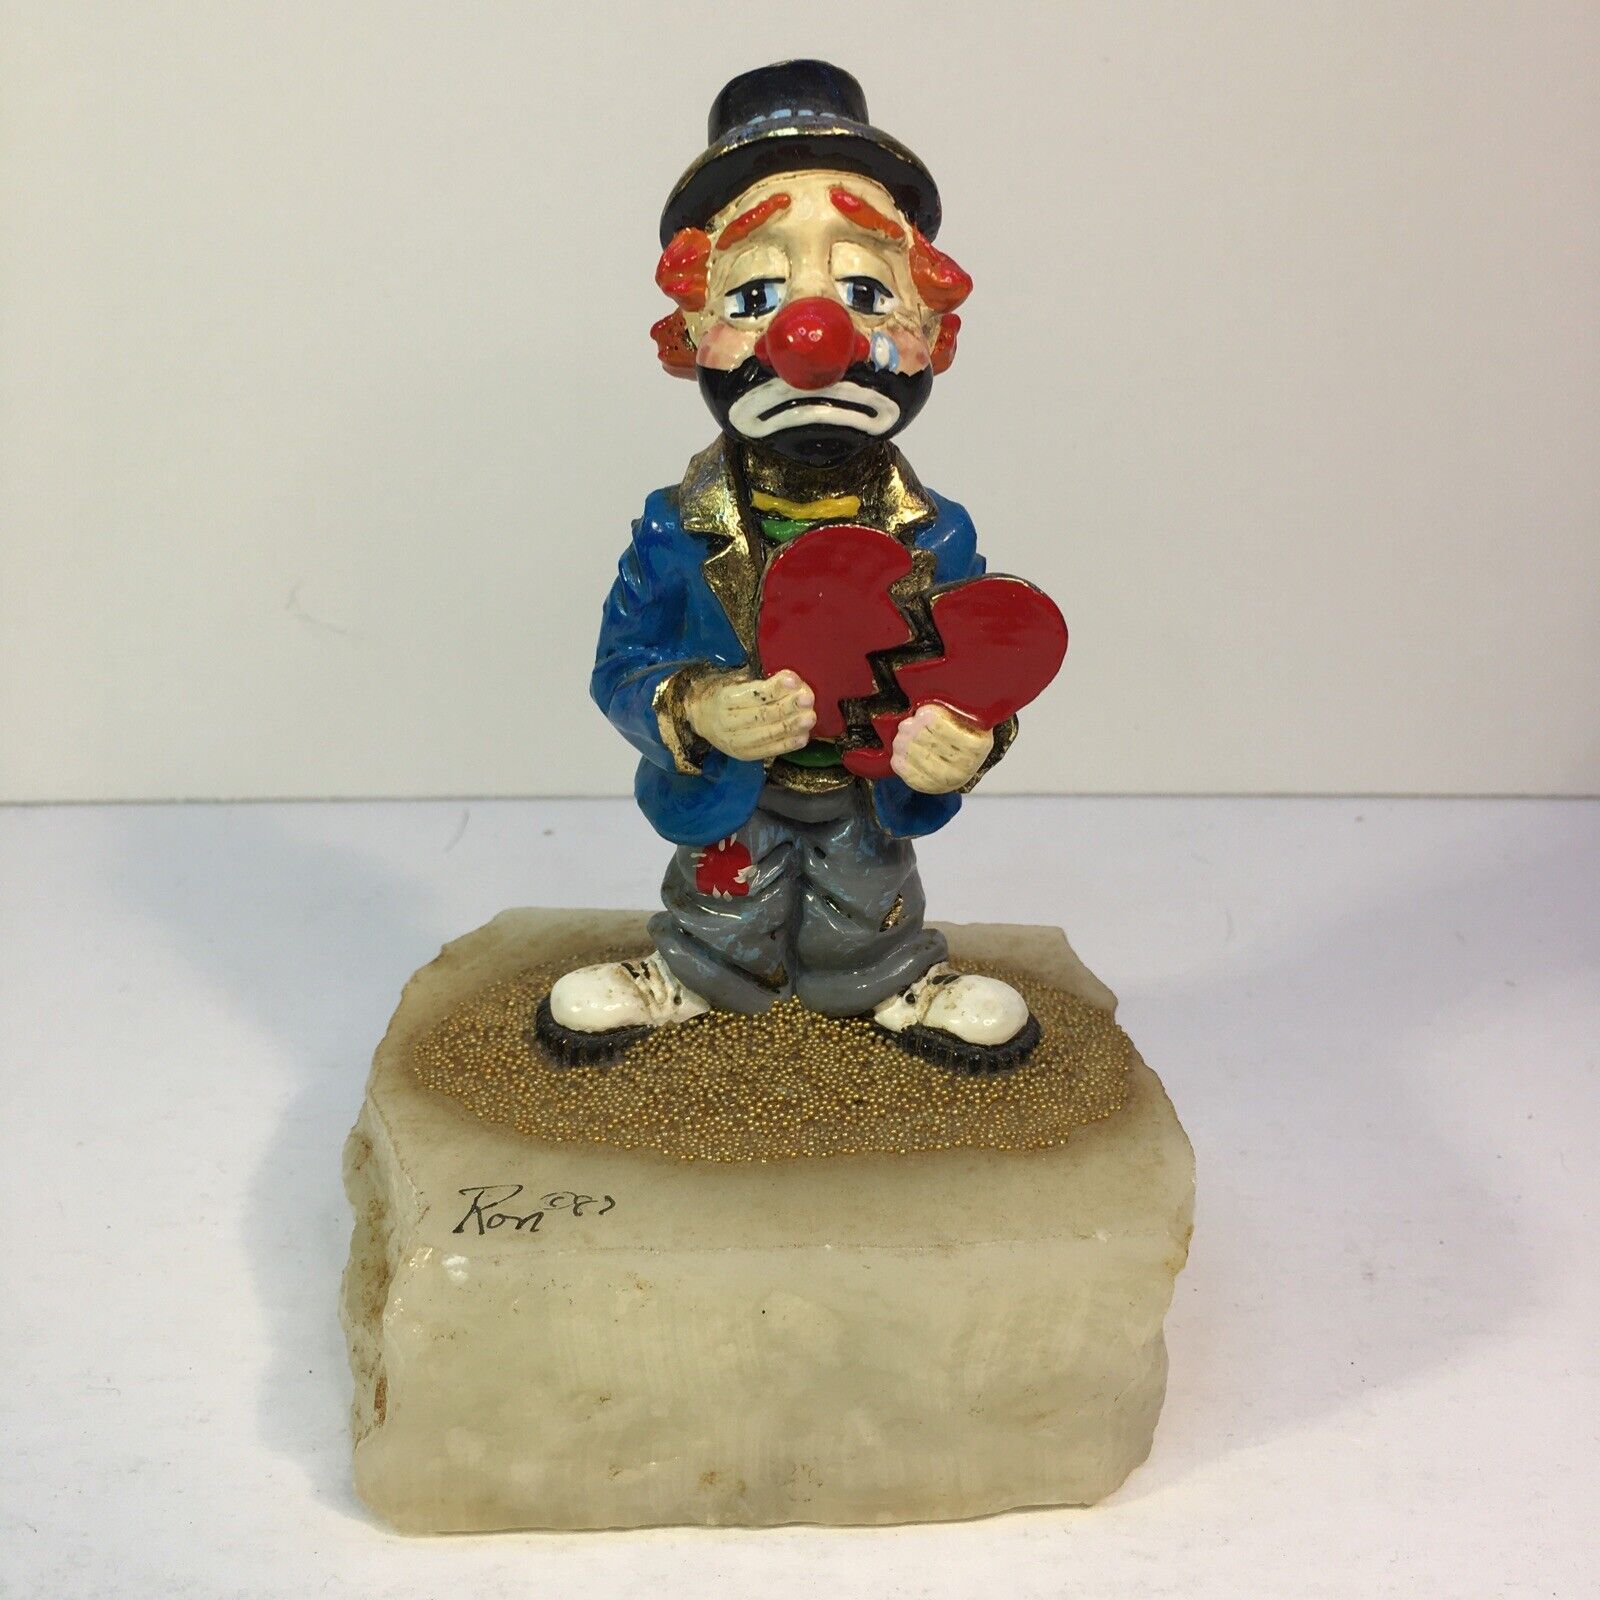 Ron Lee ART Heartbroken Signed & Numbered Limited Edition Clown Sculpture  1987